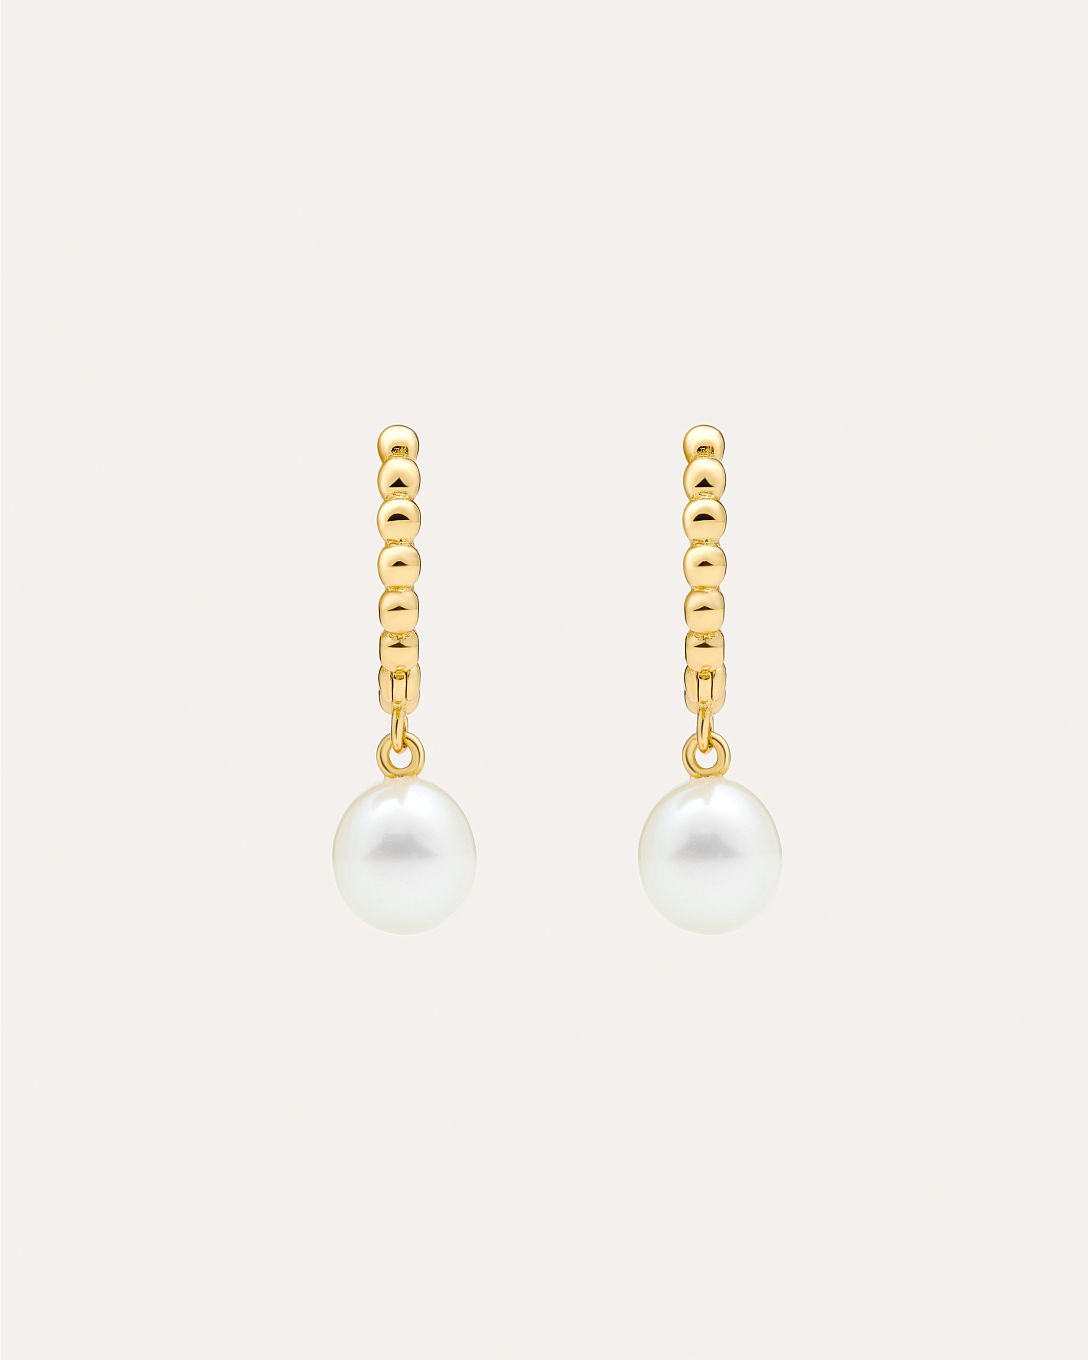 14KT Gold Plated earring with Natural Pearl